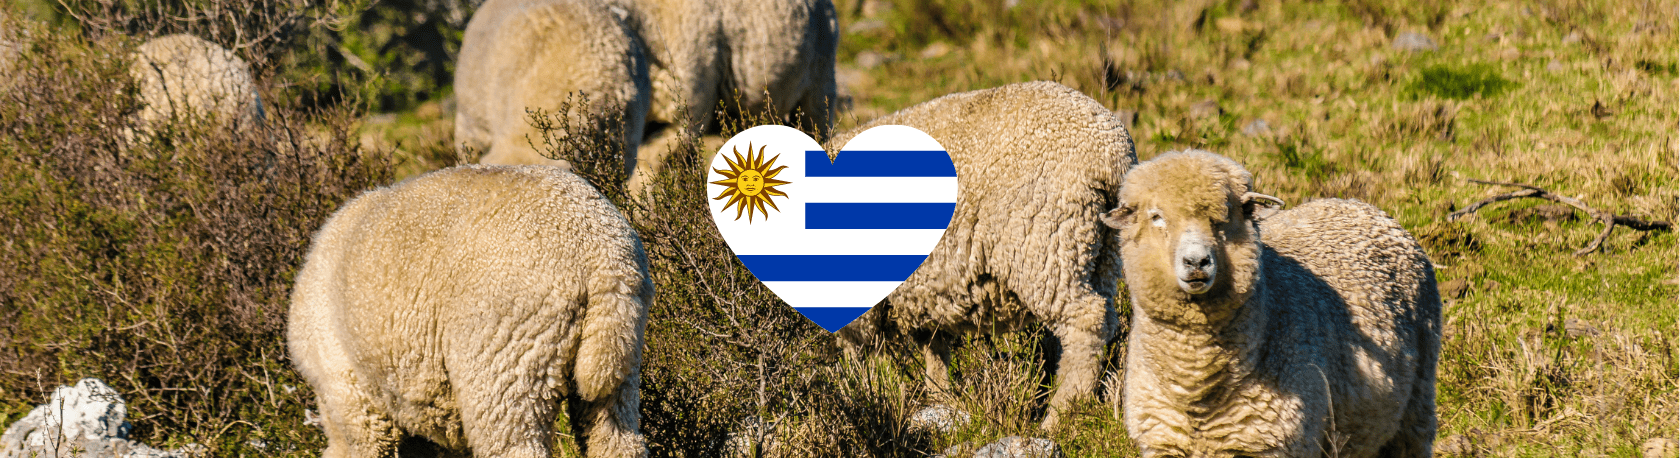 Build up your Spanish vocabulary with this fun fact about Uruguay